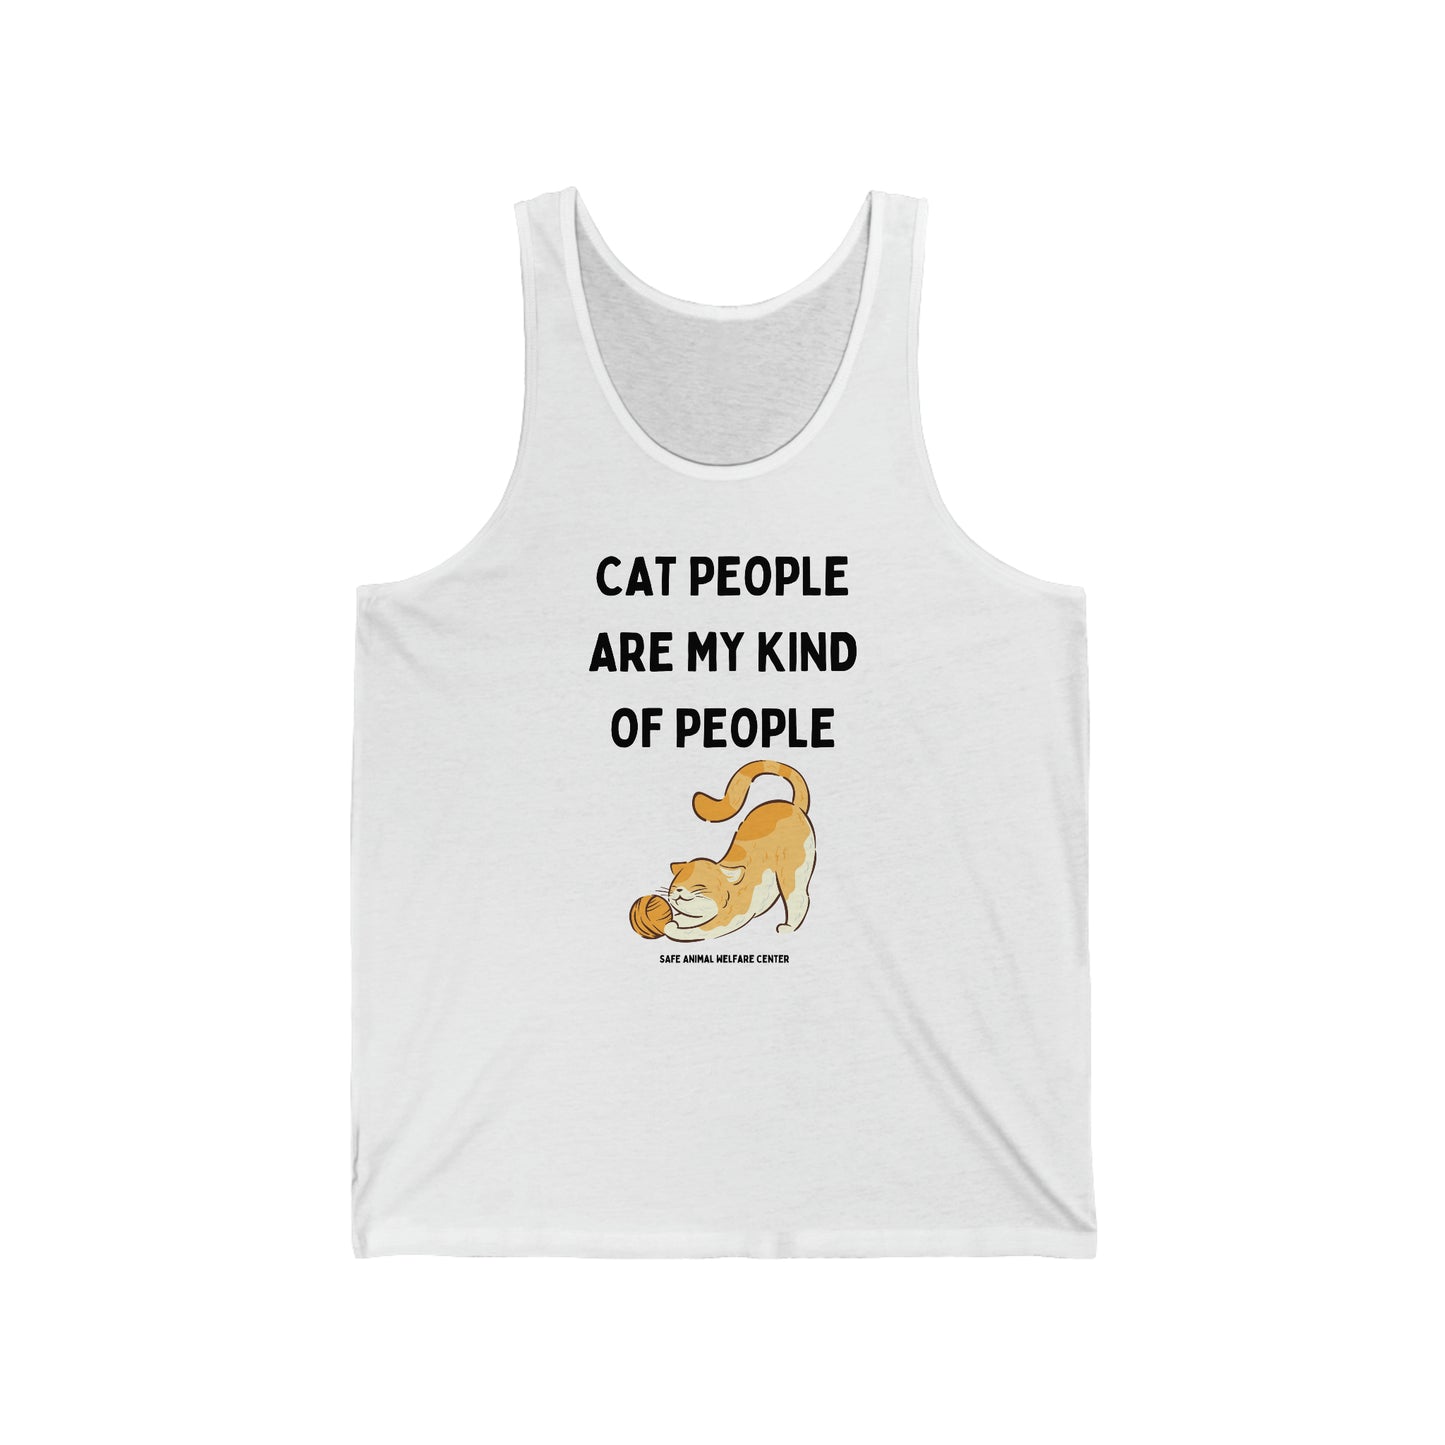 Do You Have A Cat? Unisex Jersey Tank